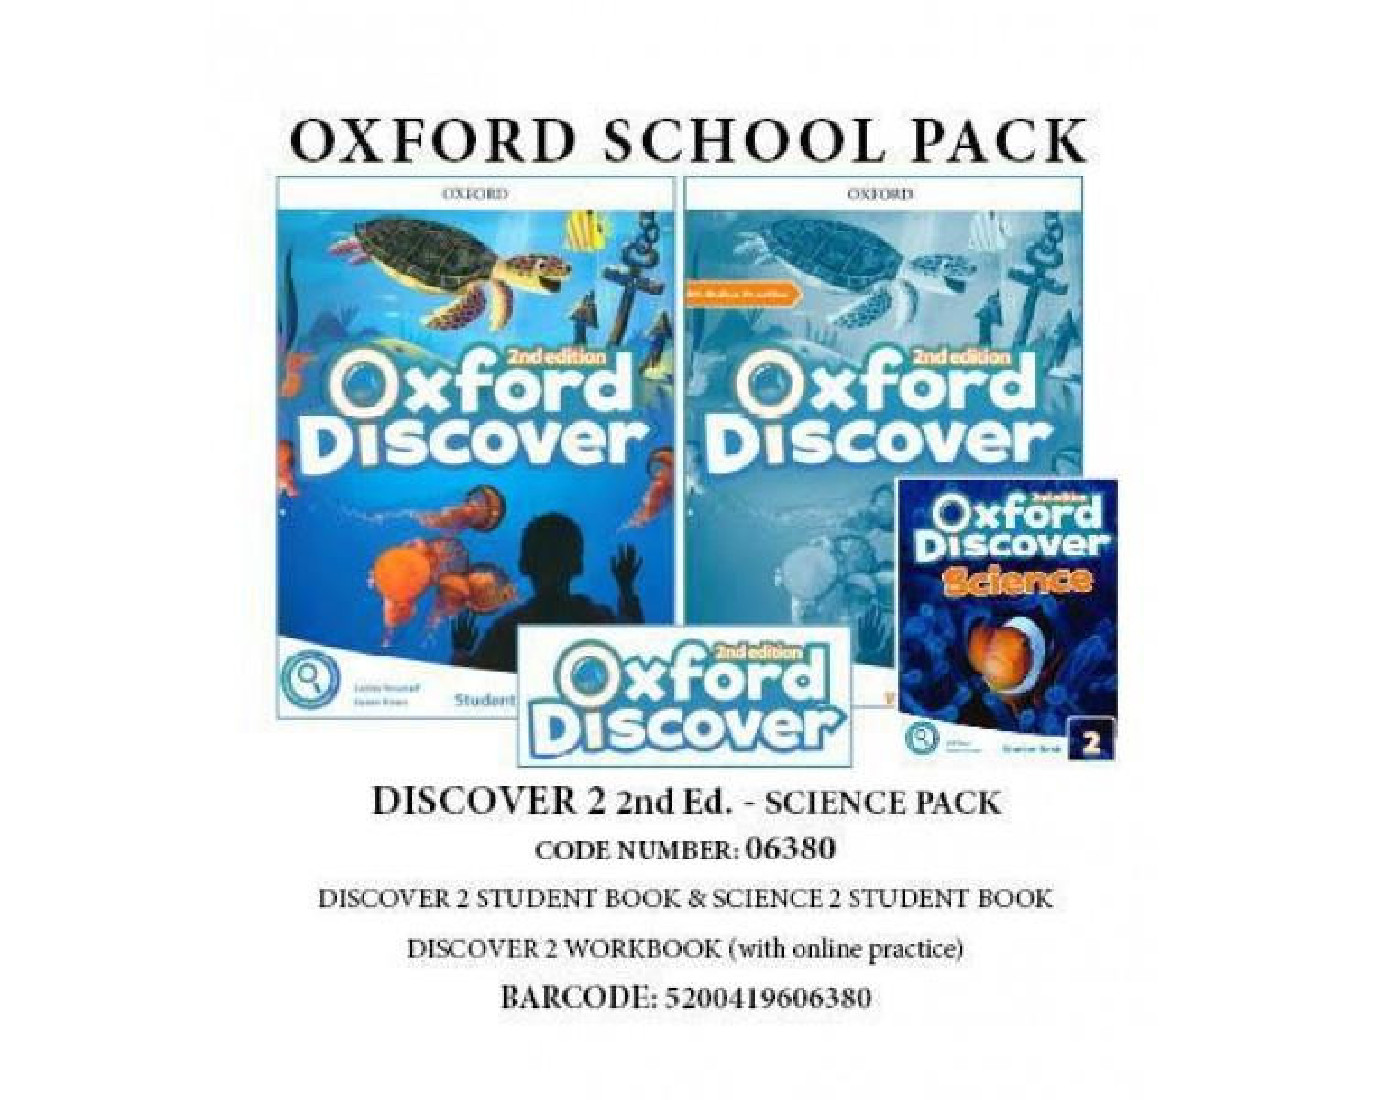 DISCOVER 2 (II ED) SCIENCE PACK